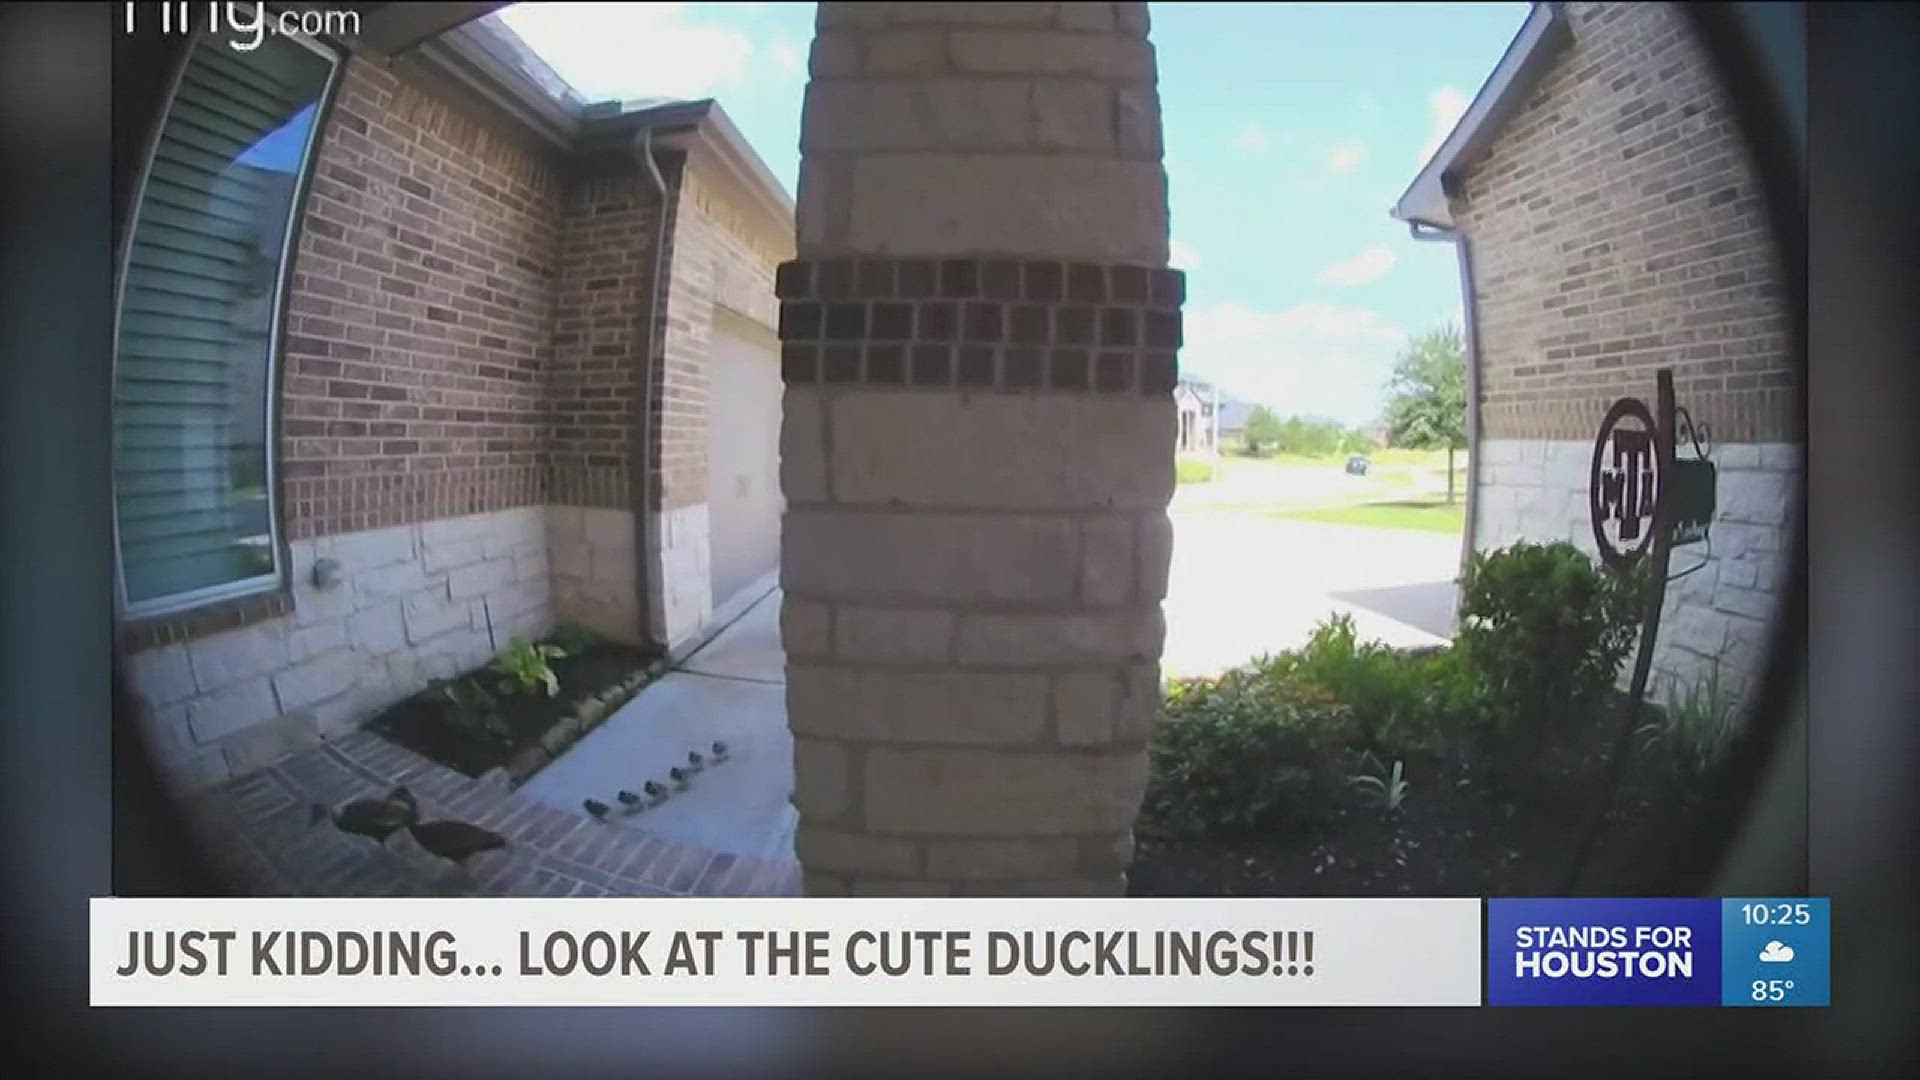 Fulshear Police are looking for highly aggressive solicitors going door-to-door in one community. Those suspects? An adorable family of ducks!